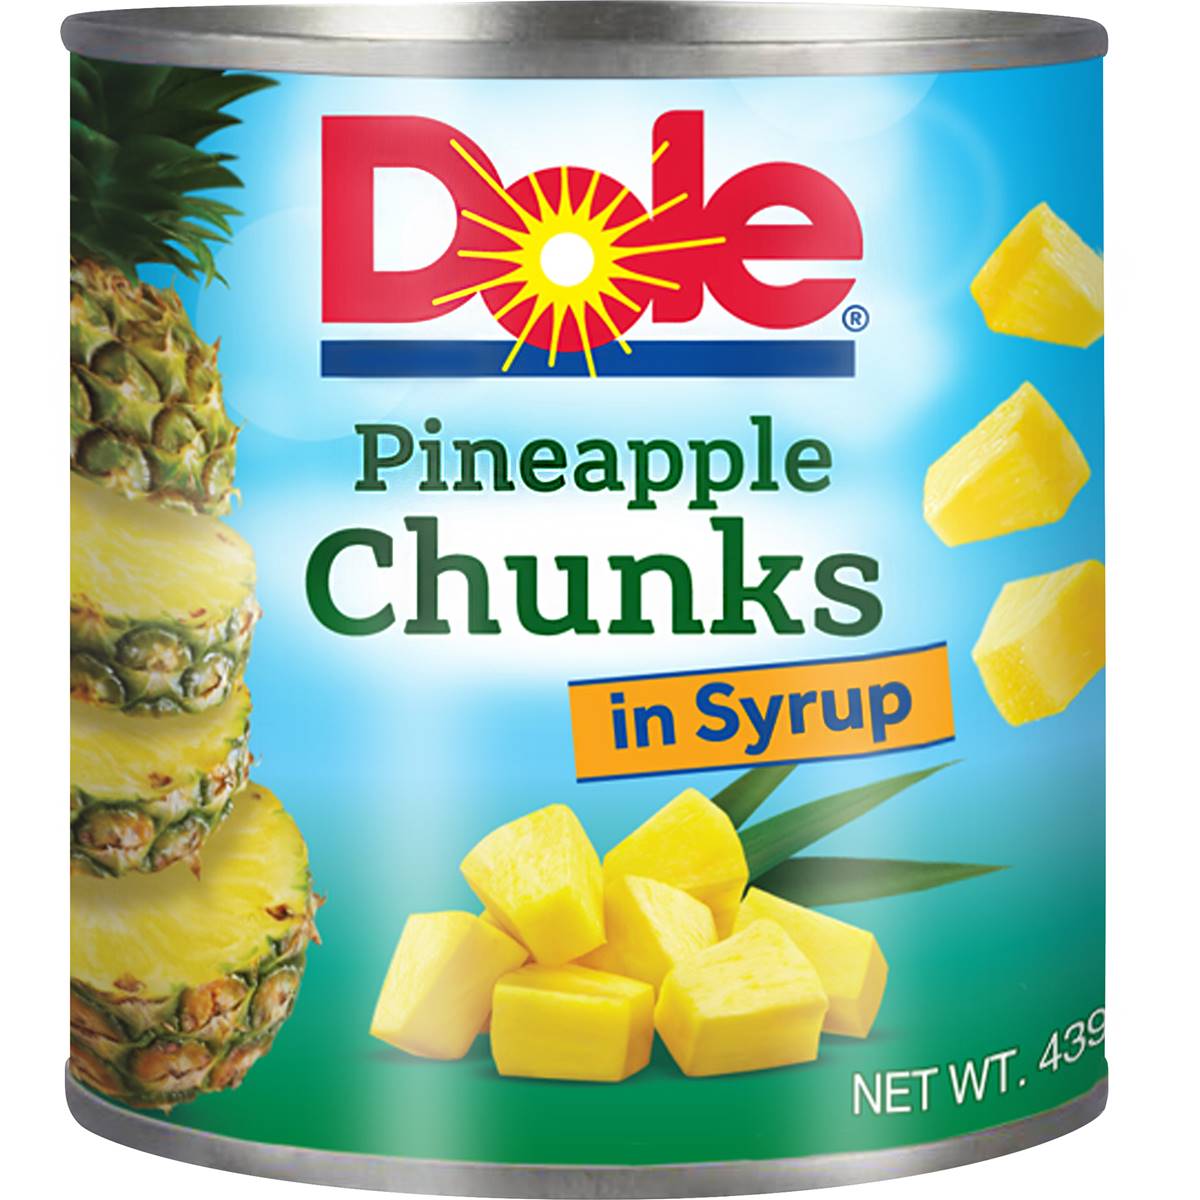 Dole Pineapple Chunks In Syrup 439g